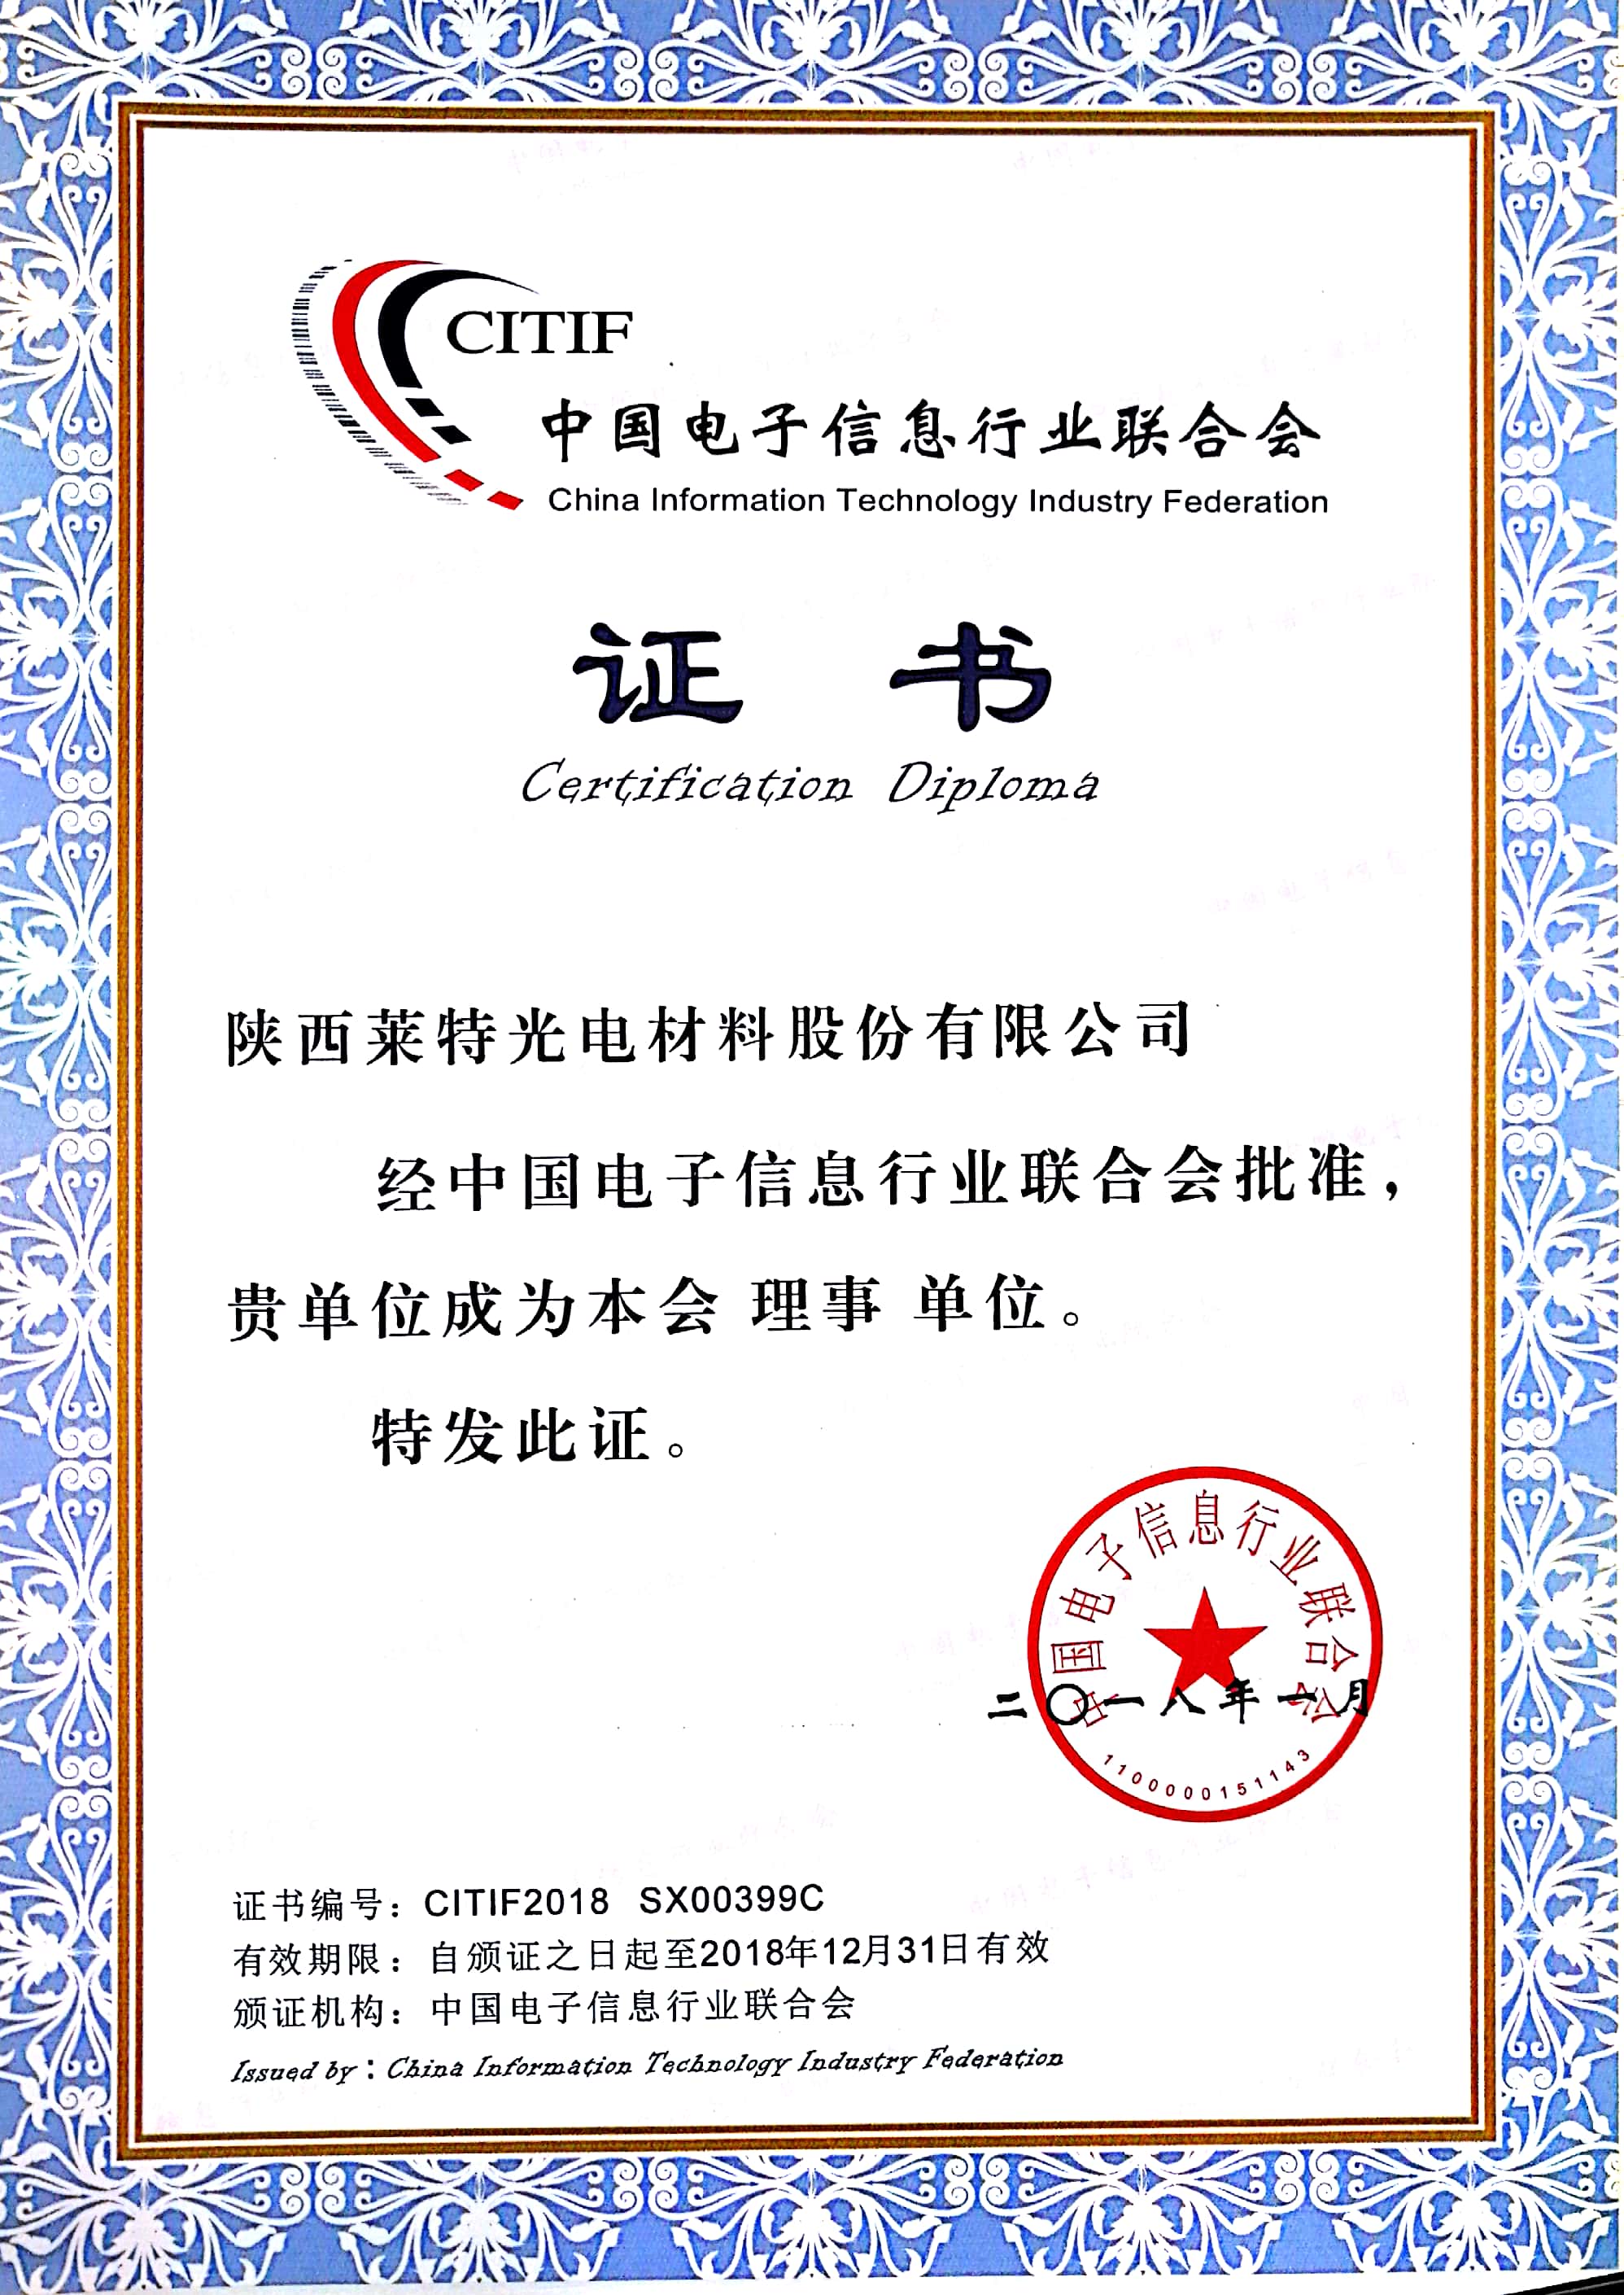 China Information Technology Industry Certificate